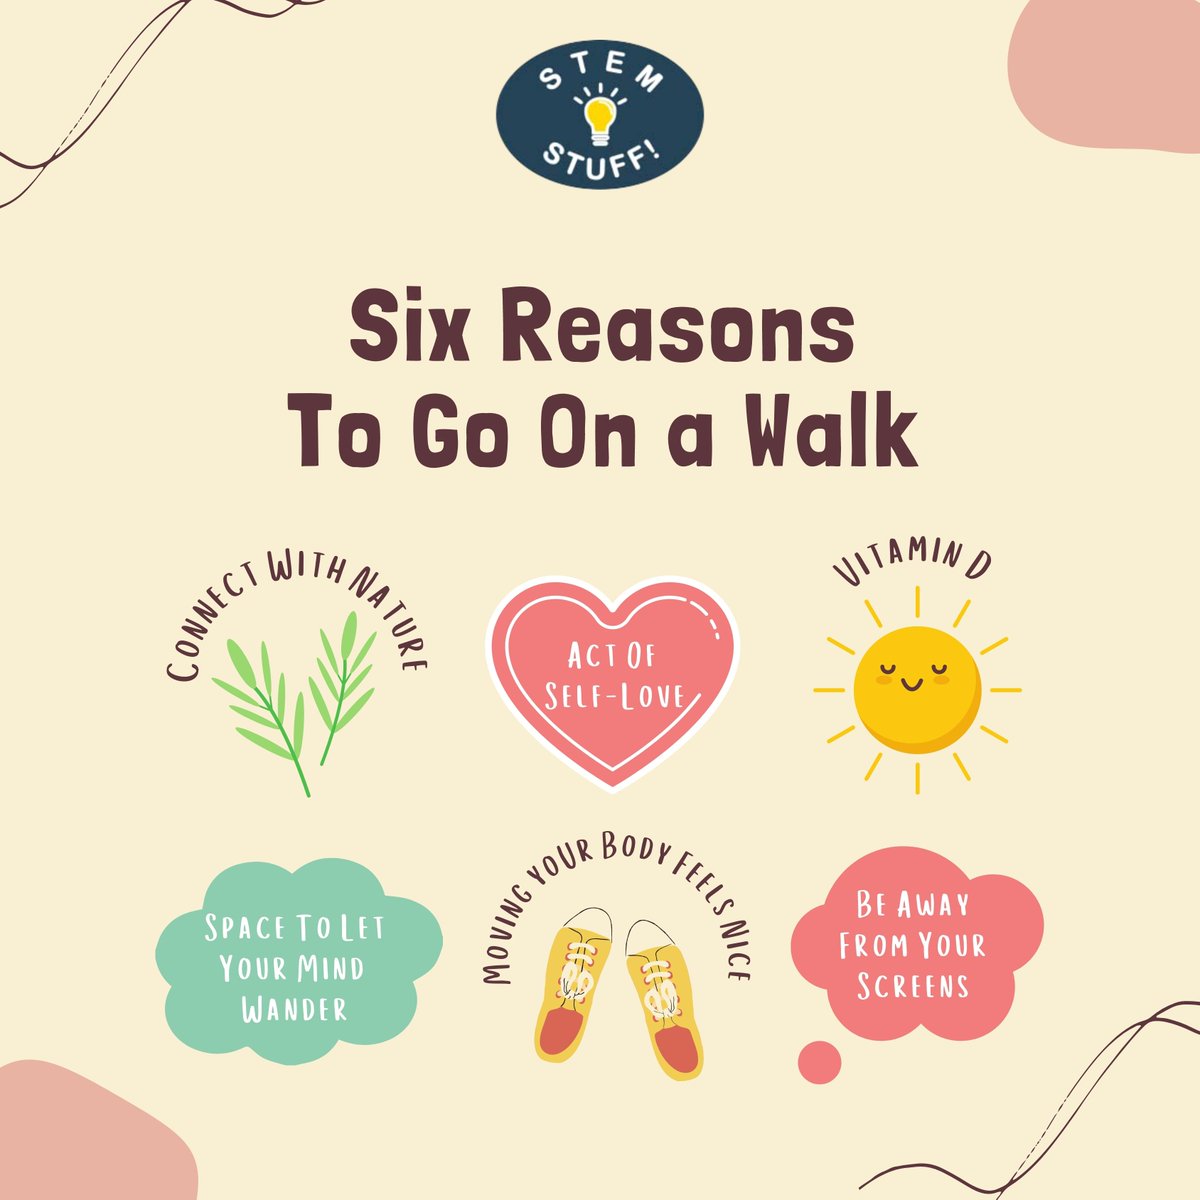 Take a step towards better physical and mental health! Check out these six compelling reasons to go on a walk and start reaping the benefits today. 
. 
. 
𝐒𝐡𝐨𝐩 𝐍𝐨𝐰: amazon.com/stemstuff?maas…
.
.
#stemstuff #stemtoys